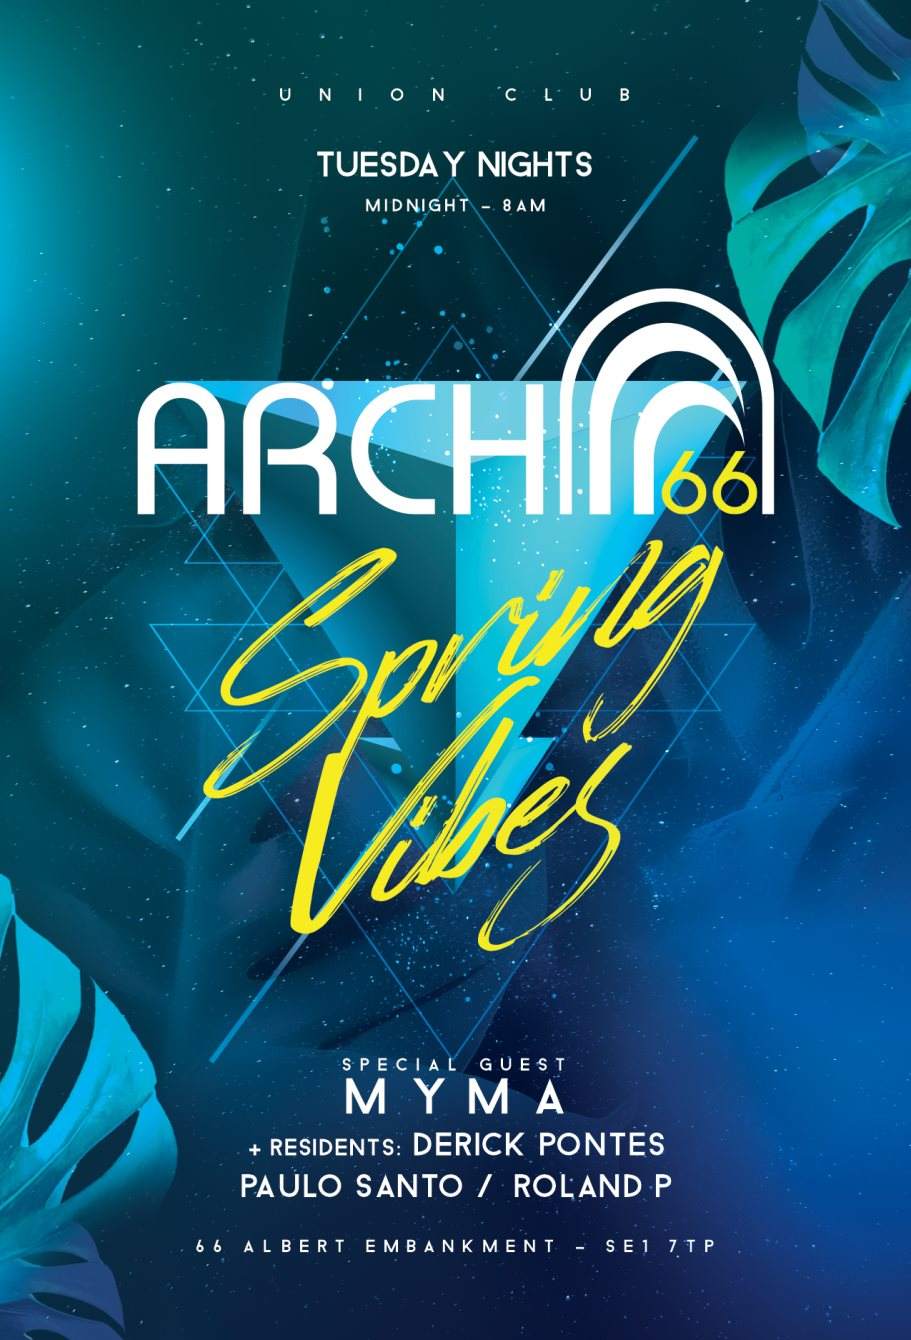 ARCH66 - with Myma - Tuesday Night Afterhours (House - Disco - Techhouse) - フライヤー表